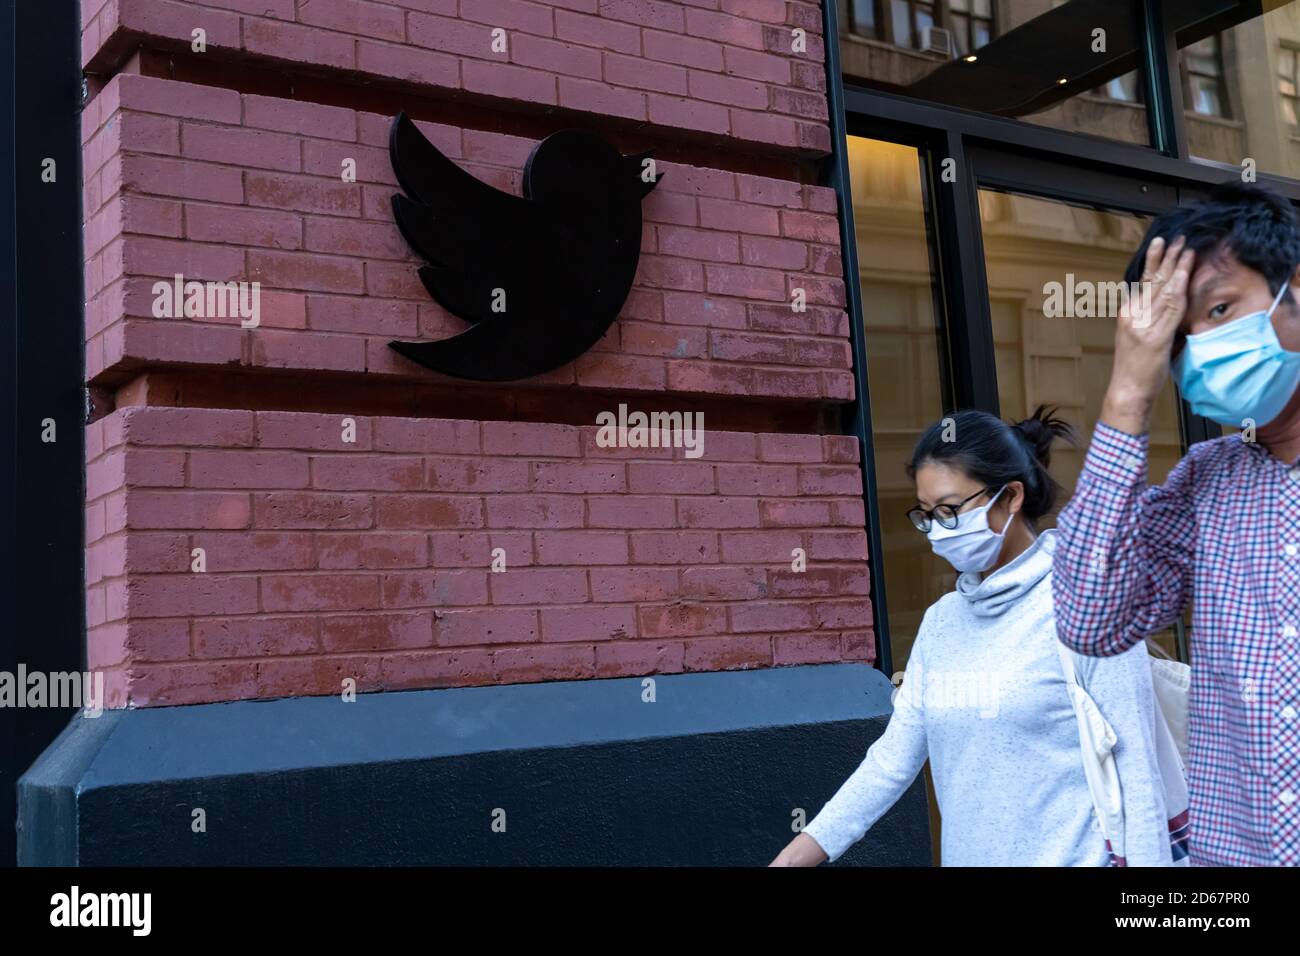 New York, United States. 14th Oct, 2020. People wearing face masks walk past a Twitter logo outside New York City headquarters.Facebook and Twitter took steps to limit the spread of a controversial New York Post article critical of Joe Biden, sparking outrage among conservatives and stoking debate over how social media platforms should tackle misinformation ahead of the US election. Credit: SOPA Images Limited/Alamy Live News Stock Photo